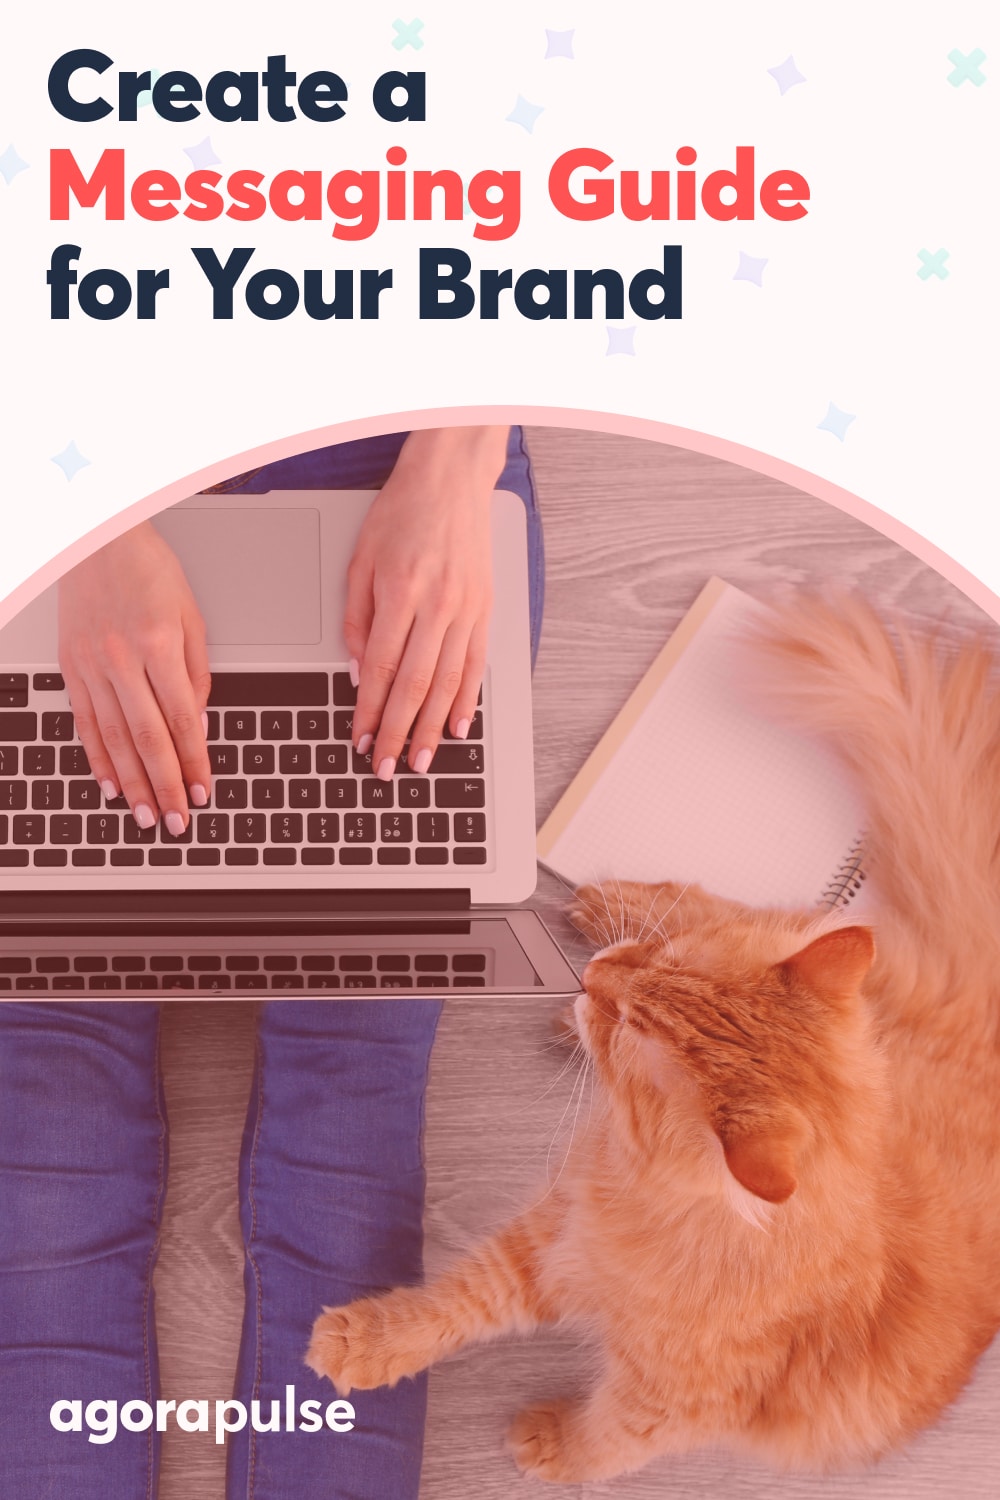 How to Write a Brand Messaging Guide (and Why You Should!)